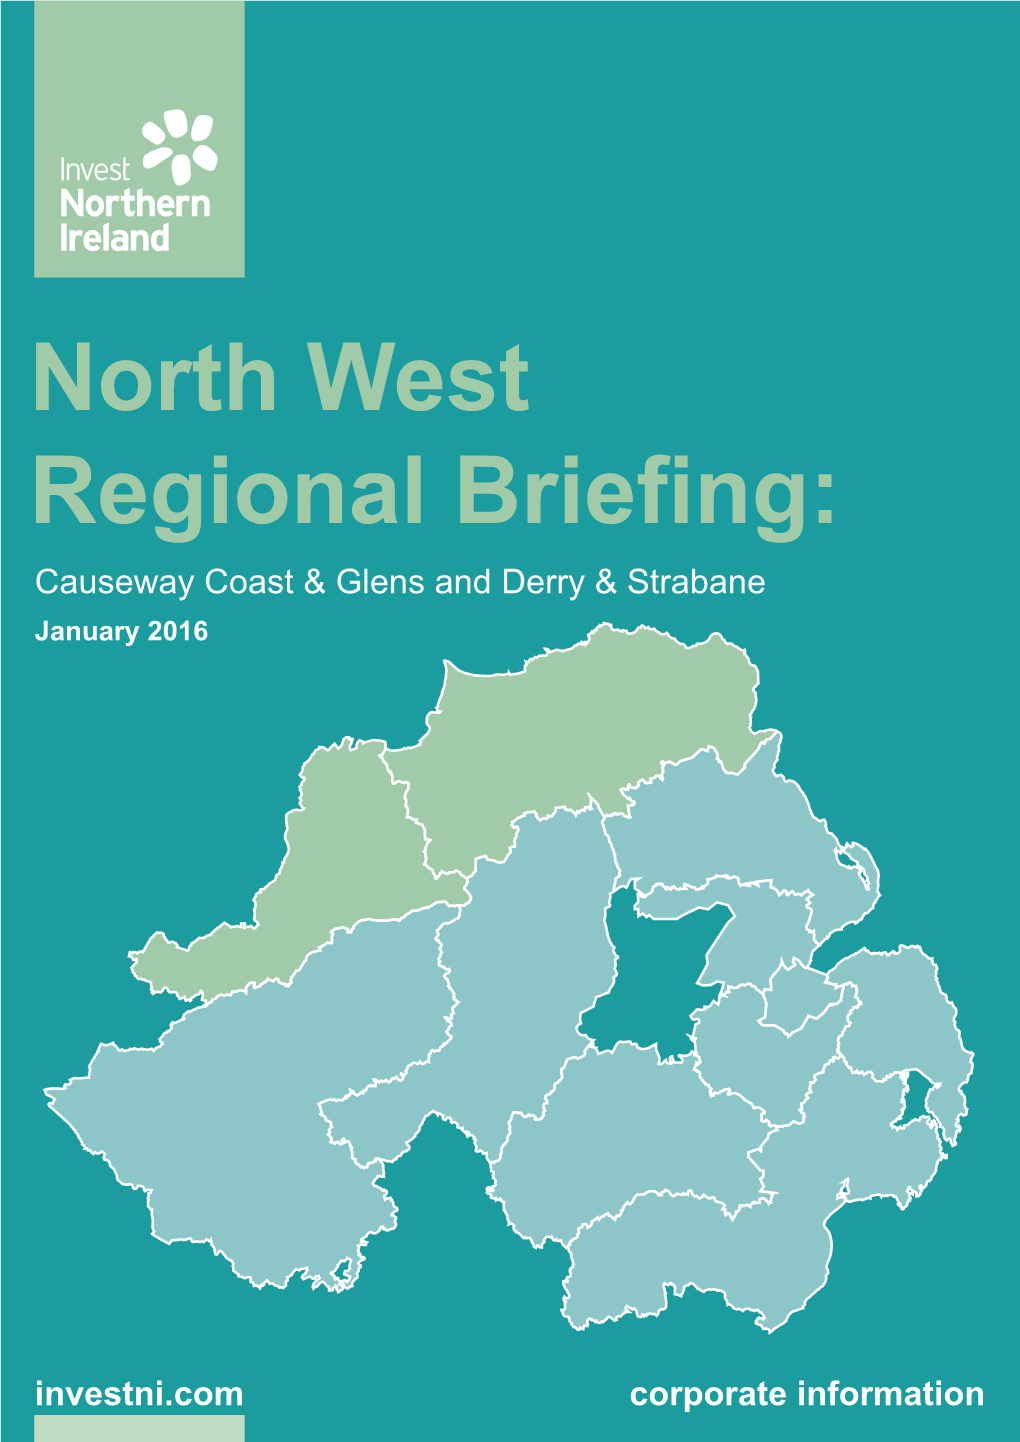 North West Regional Briefing: Causeway Coast & Glens and Derry & Strabane January 2016